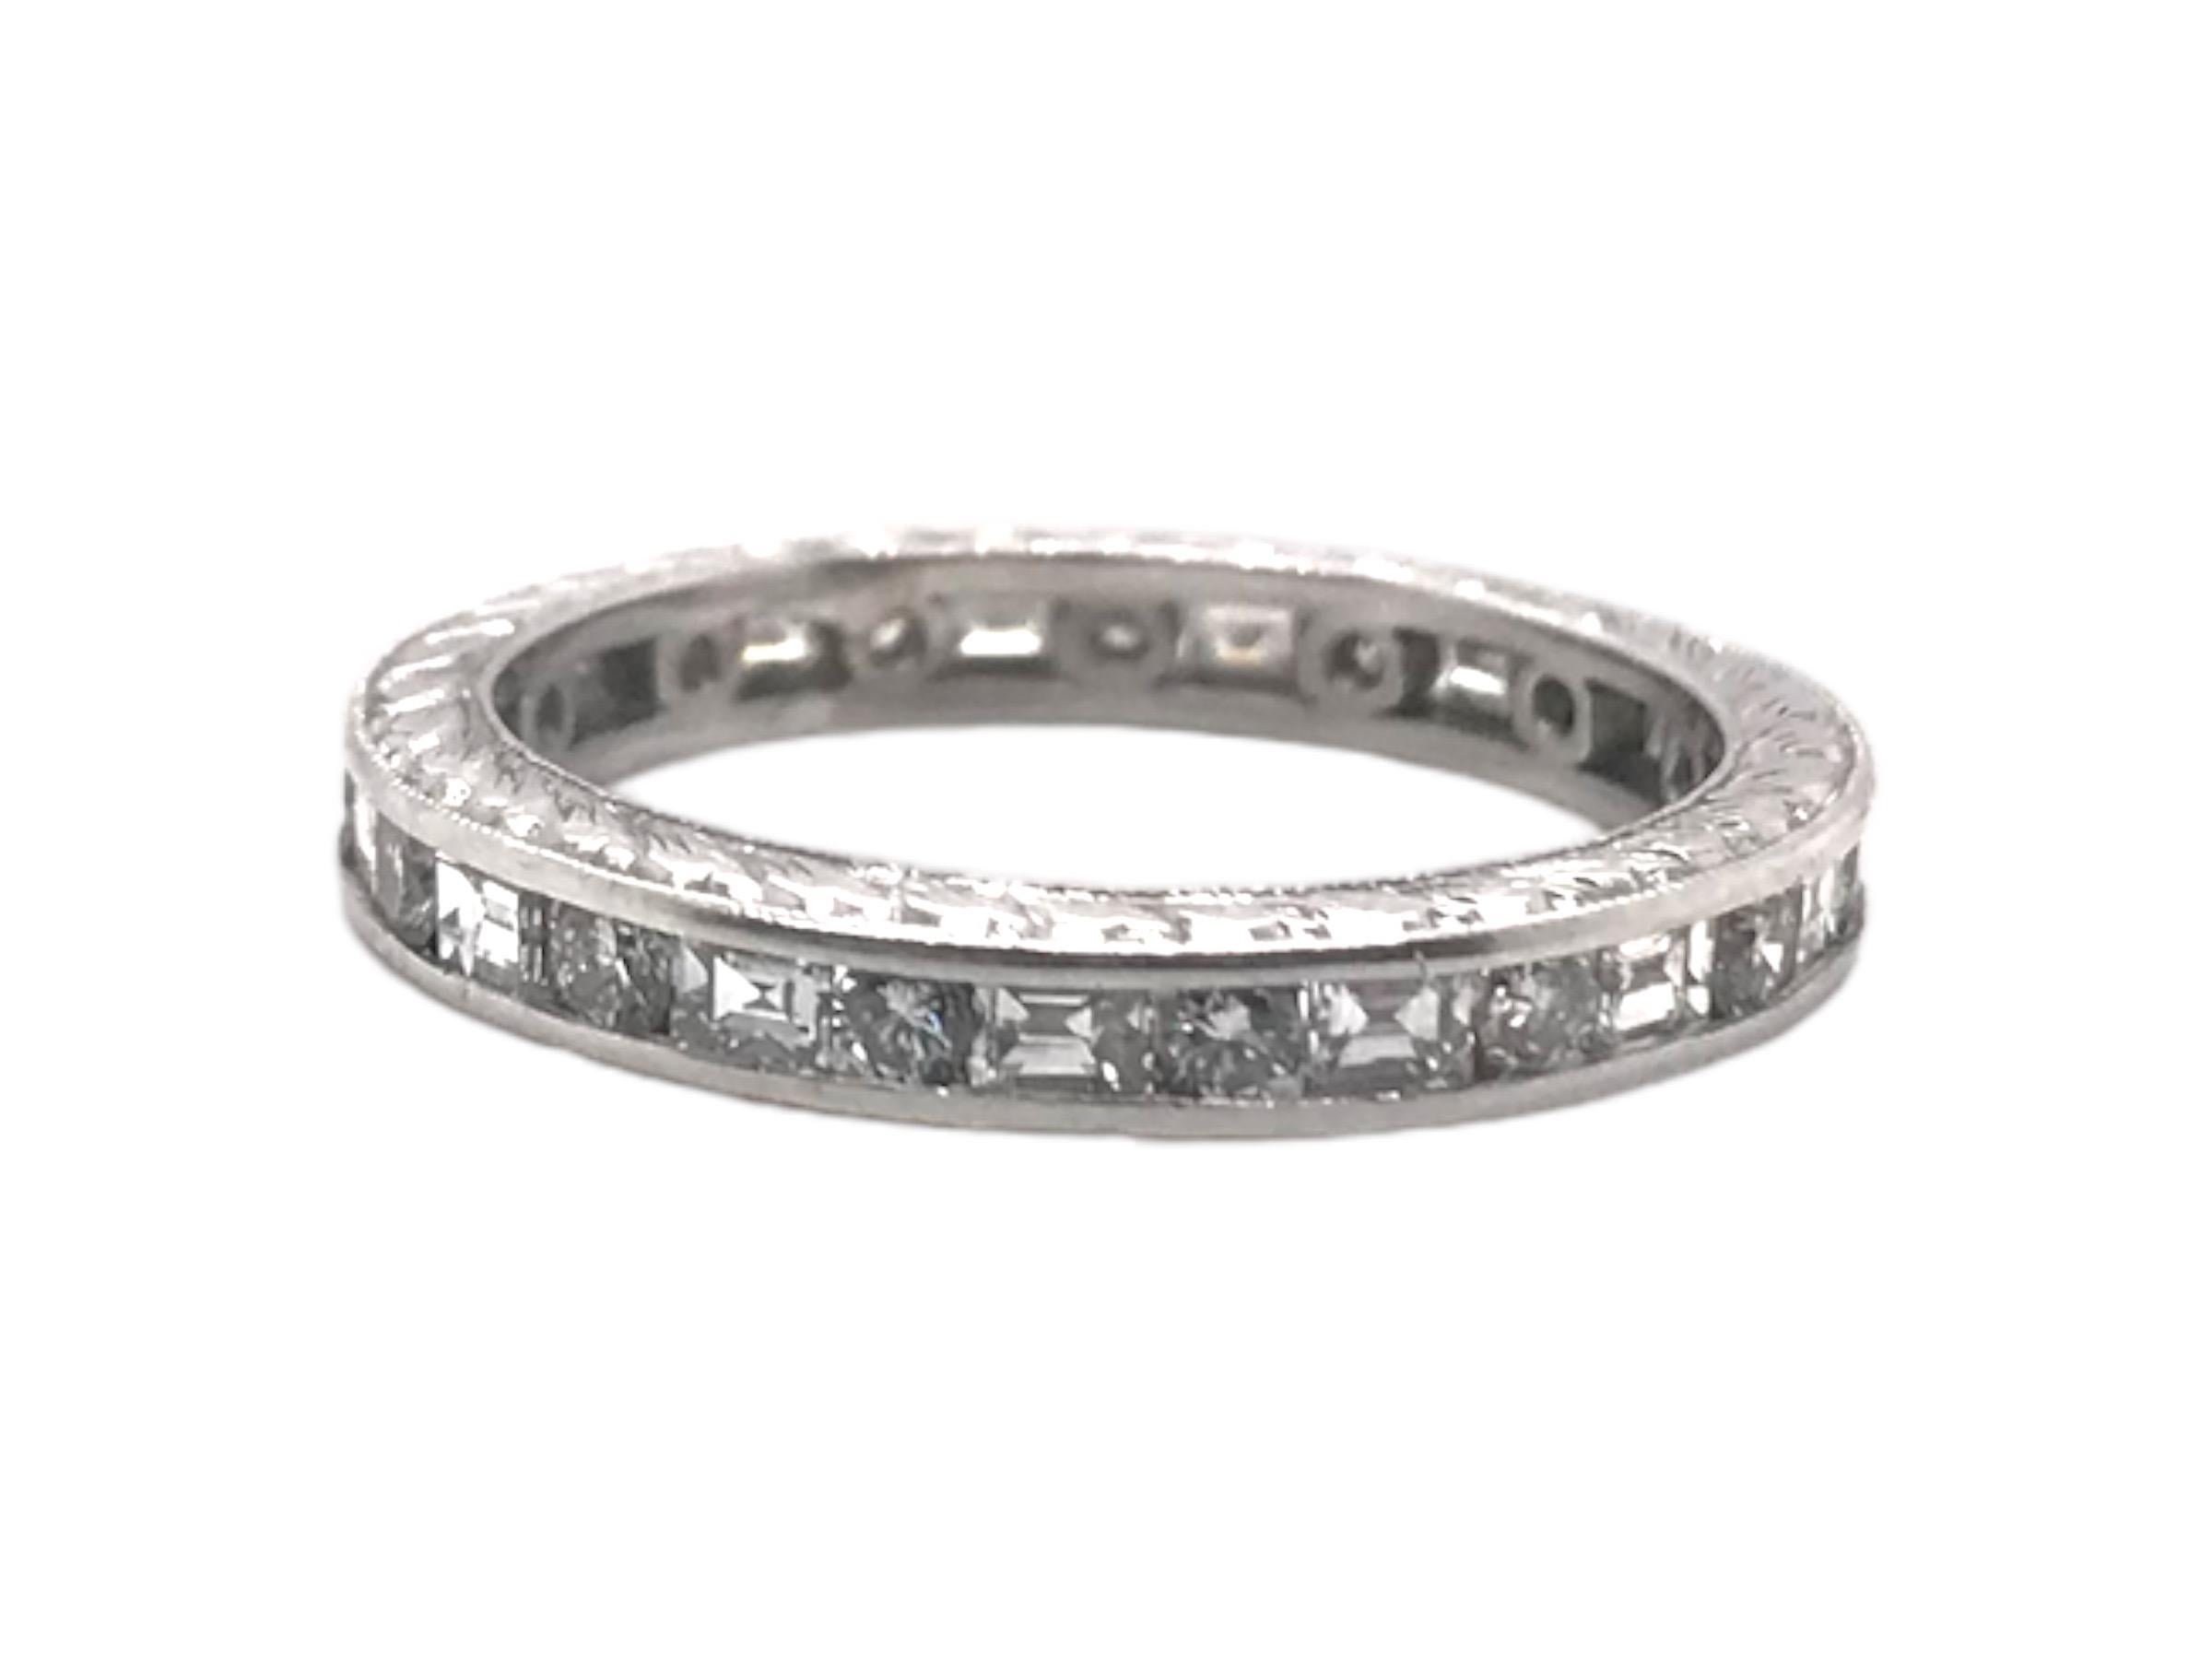 Vintage Styled Platinum 1.5 CTW Diamond Eternity Band Round & Baguette In Excellent Condition For Sale In Montgomery, AL